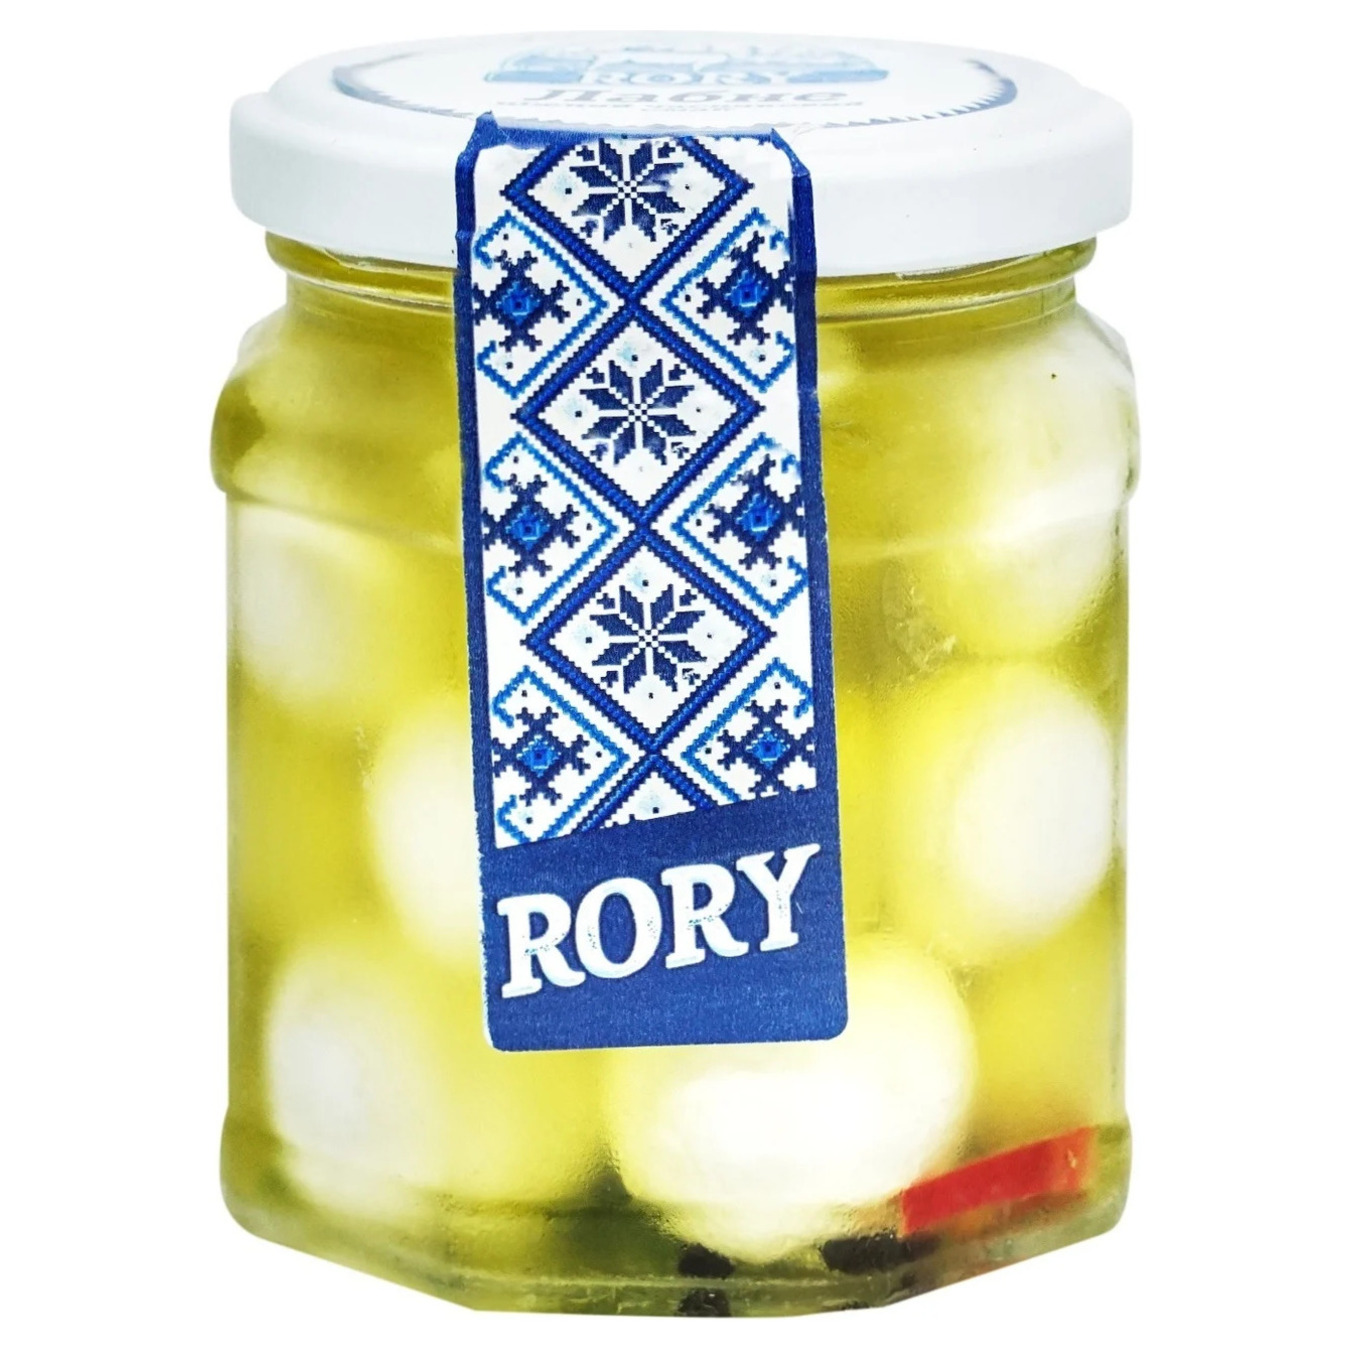 Rory Labne cheese in olive oil 100g